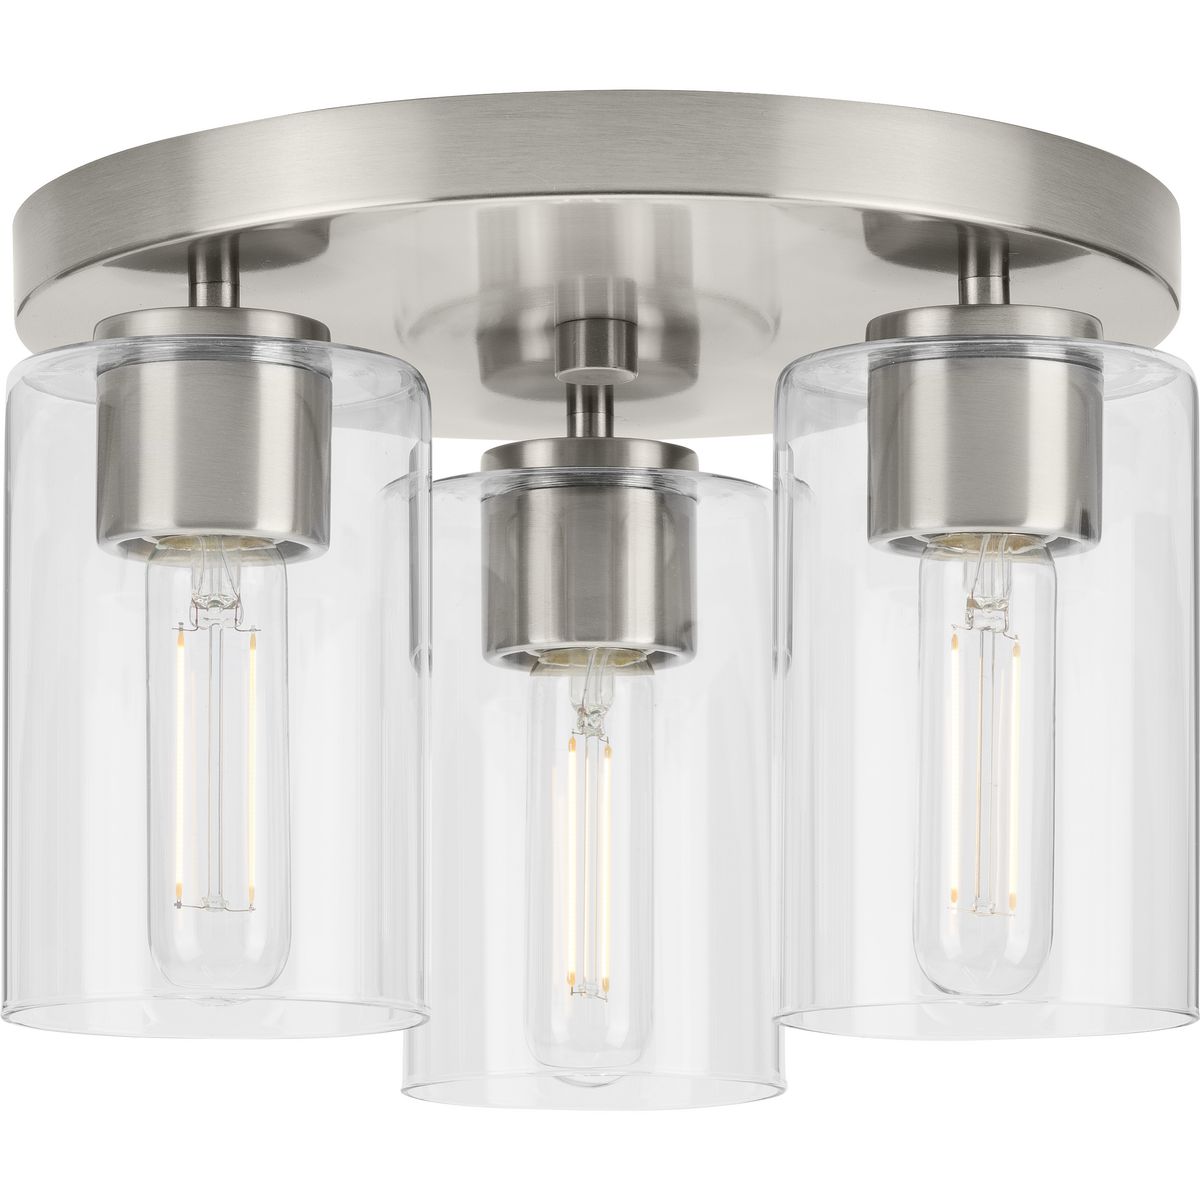 PROGRESS LIGHTING P350237-009 Brushed Nickel Cofield Collection 12 in. Three-Light Brushed Nickel Transitional Flush Mount